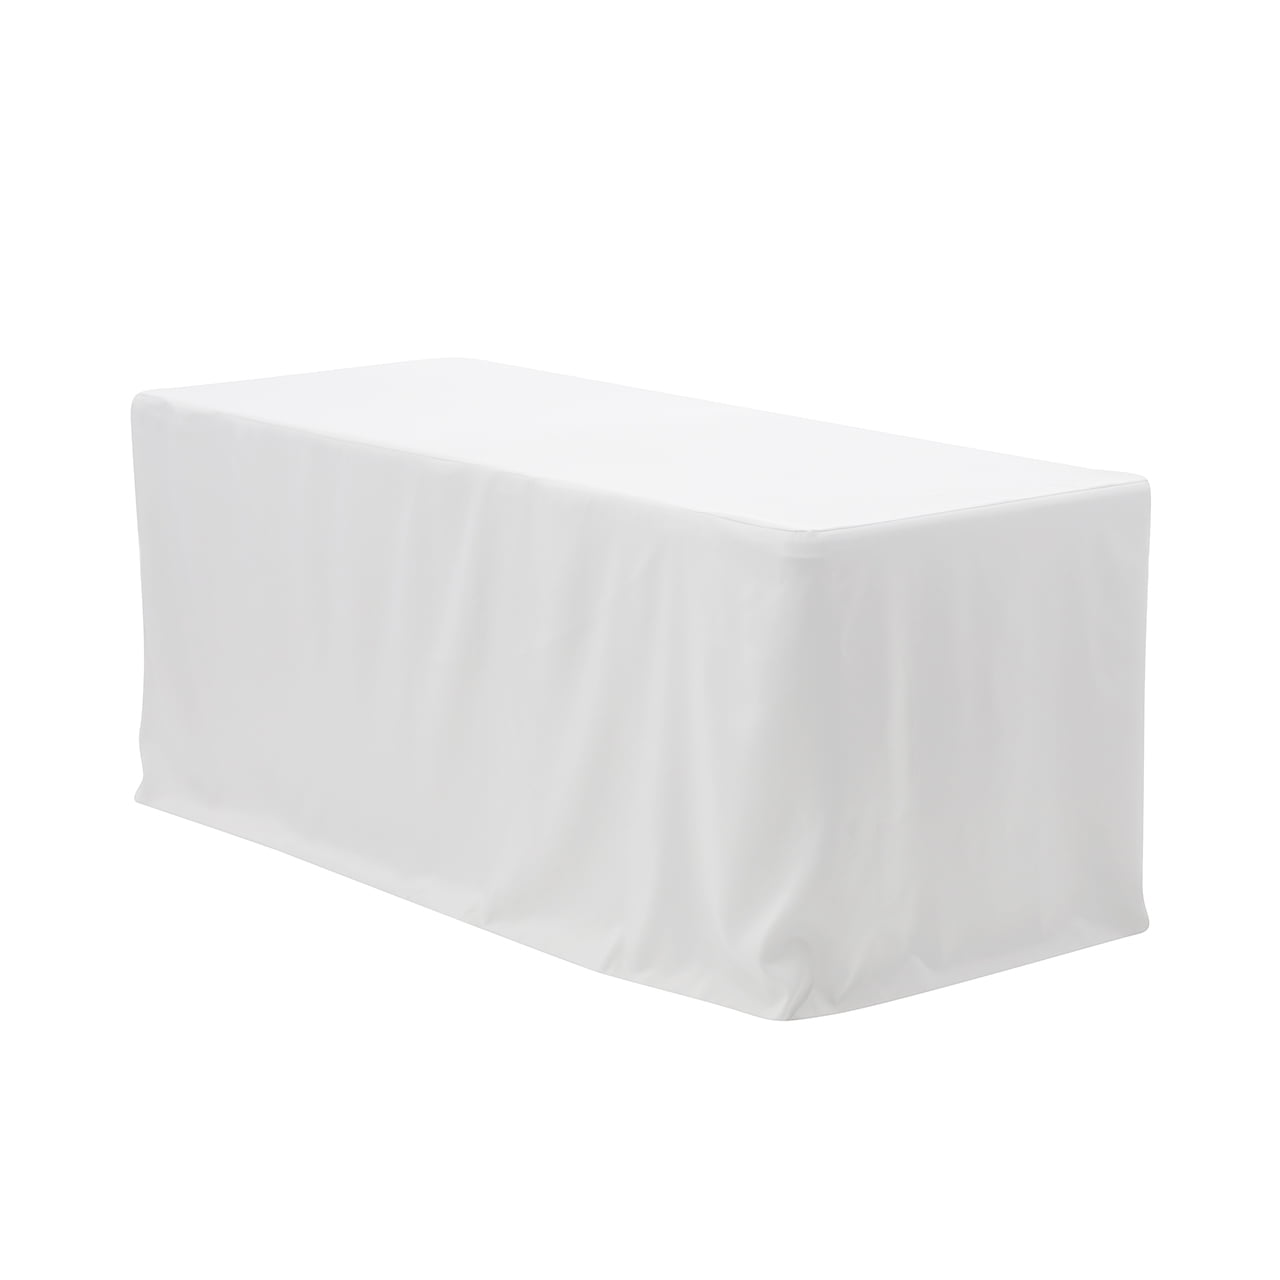 6 Ft Fitted Polyester Tablecloth, What Size Overlay For A 6 Foot Rectangular Table